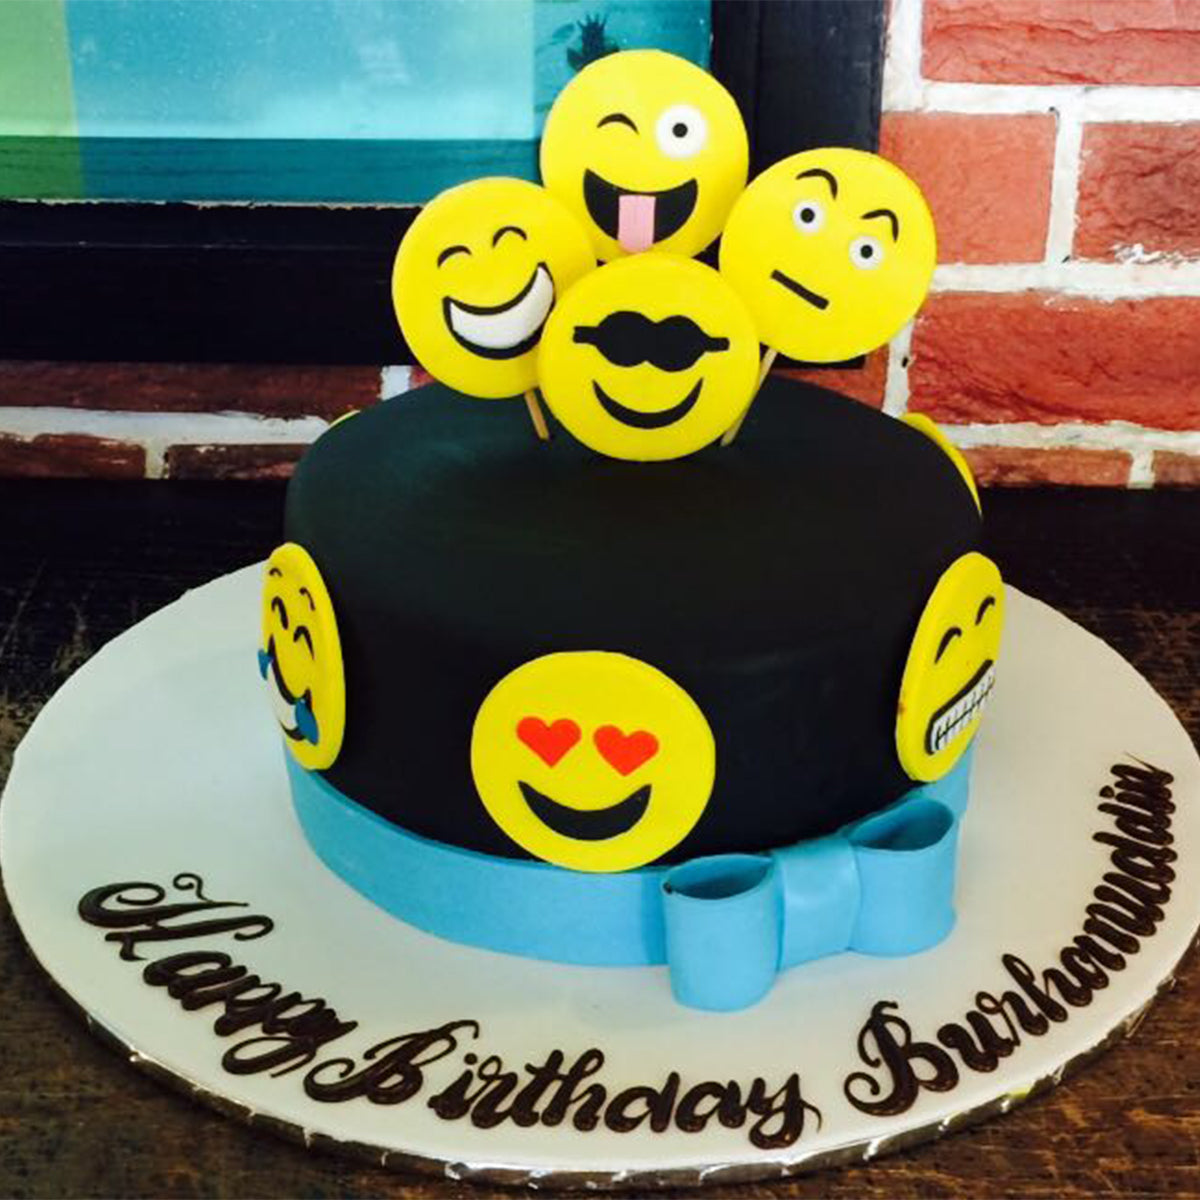 Retirement Cake - Emoji Cake - Cakes and Balloons by Debbie